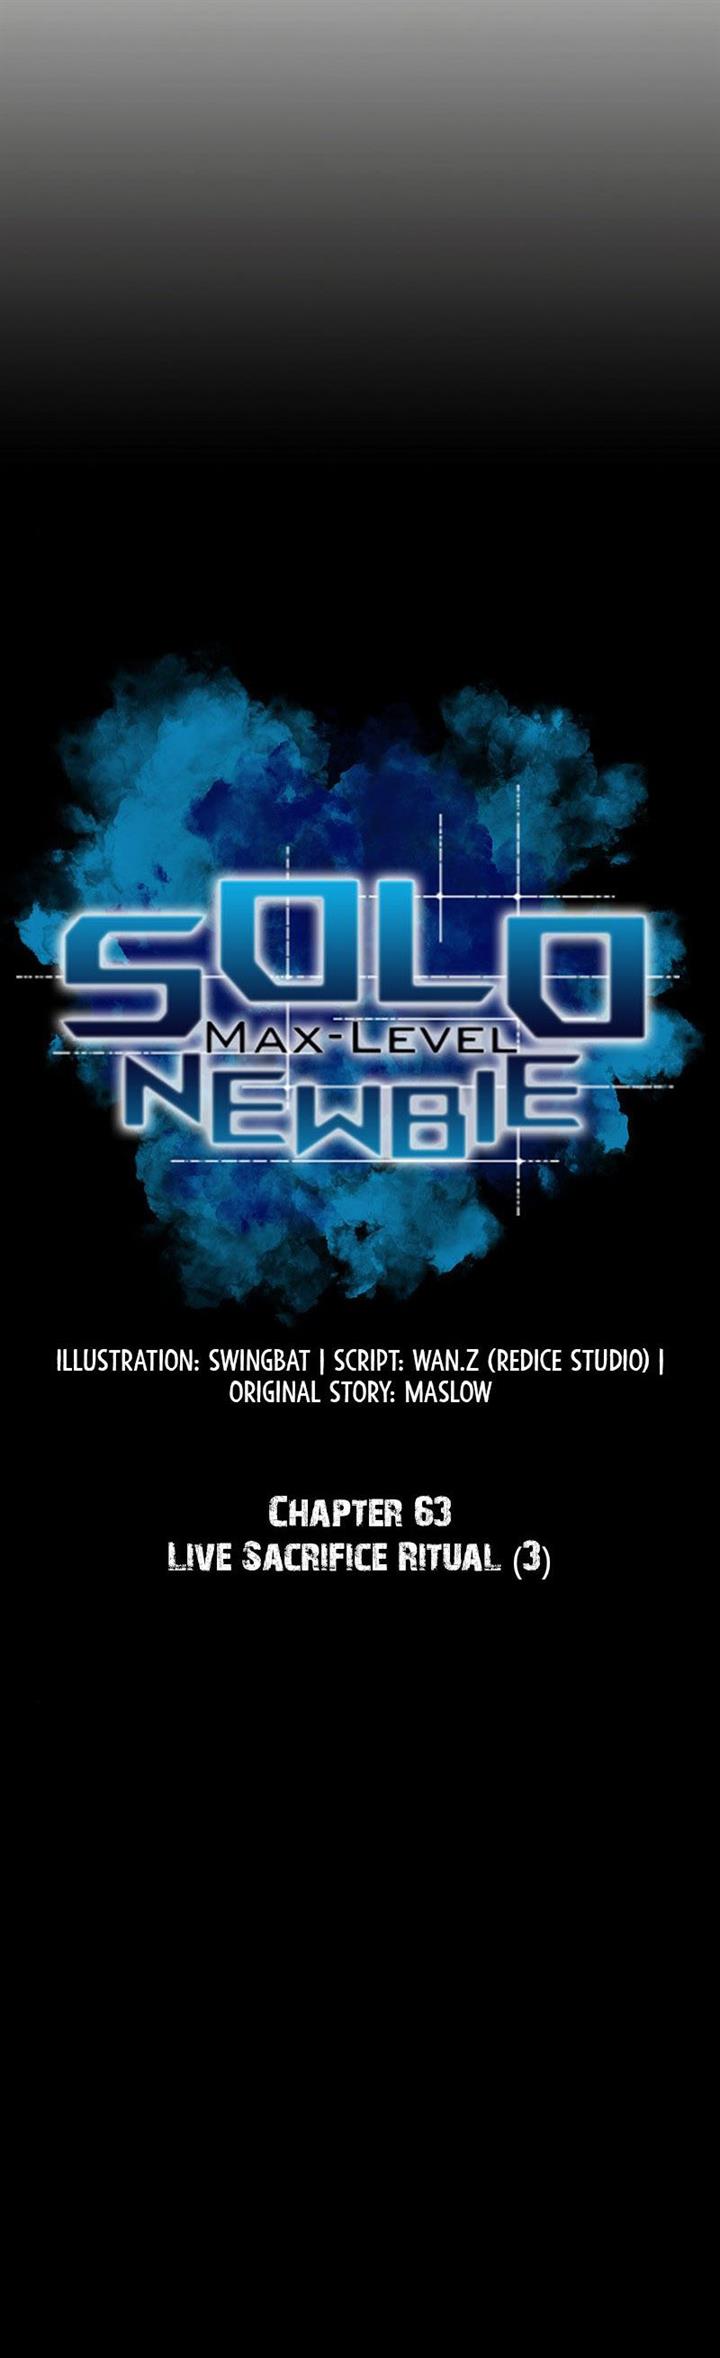 Solo Max-Level Newbie Chapter 63